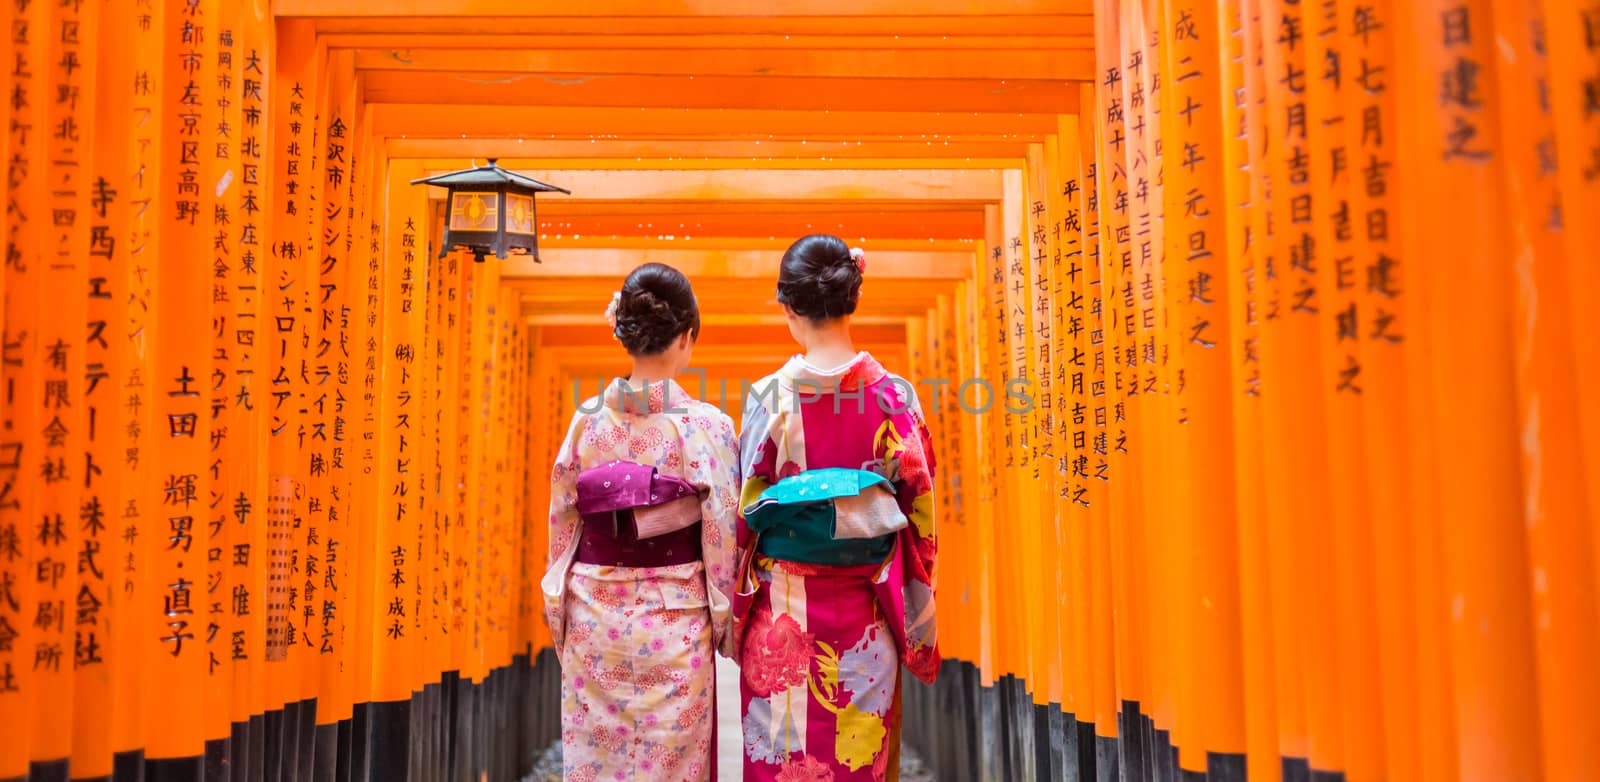 Two geishas among red wooden Tori Gate at Fushimi Inari Shrine in Kyoto, Japan by kasto